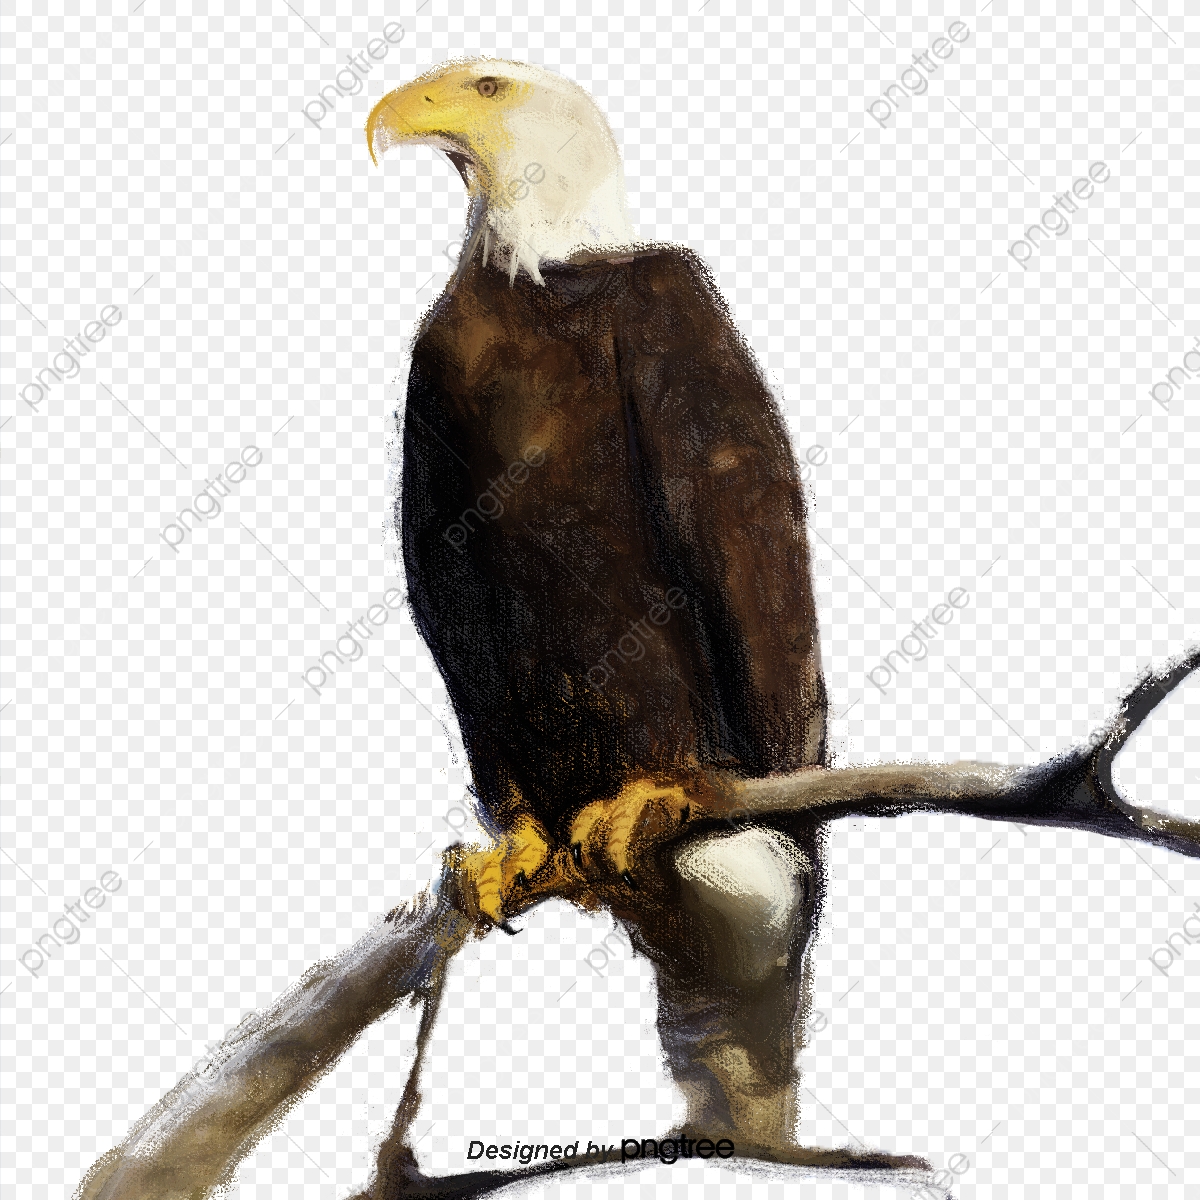 The elements of standing. Eagle clipart majestic